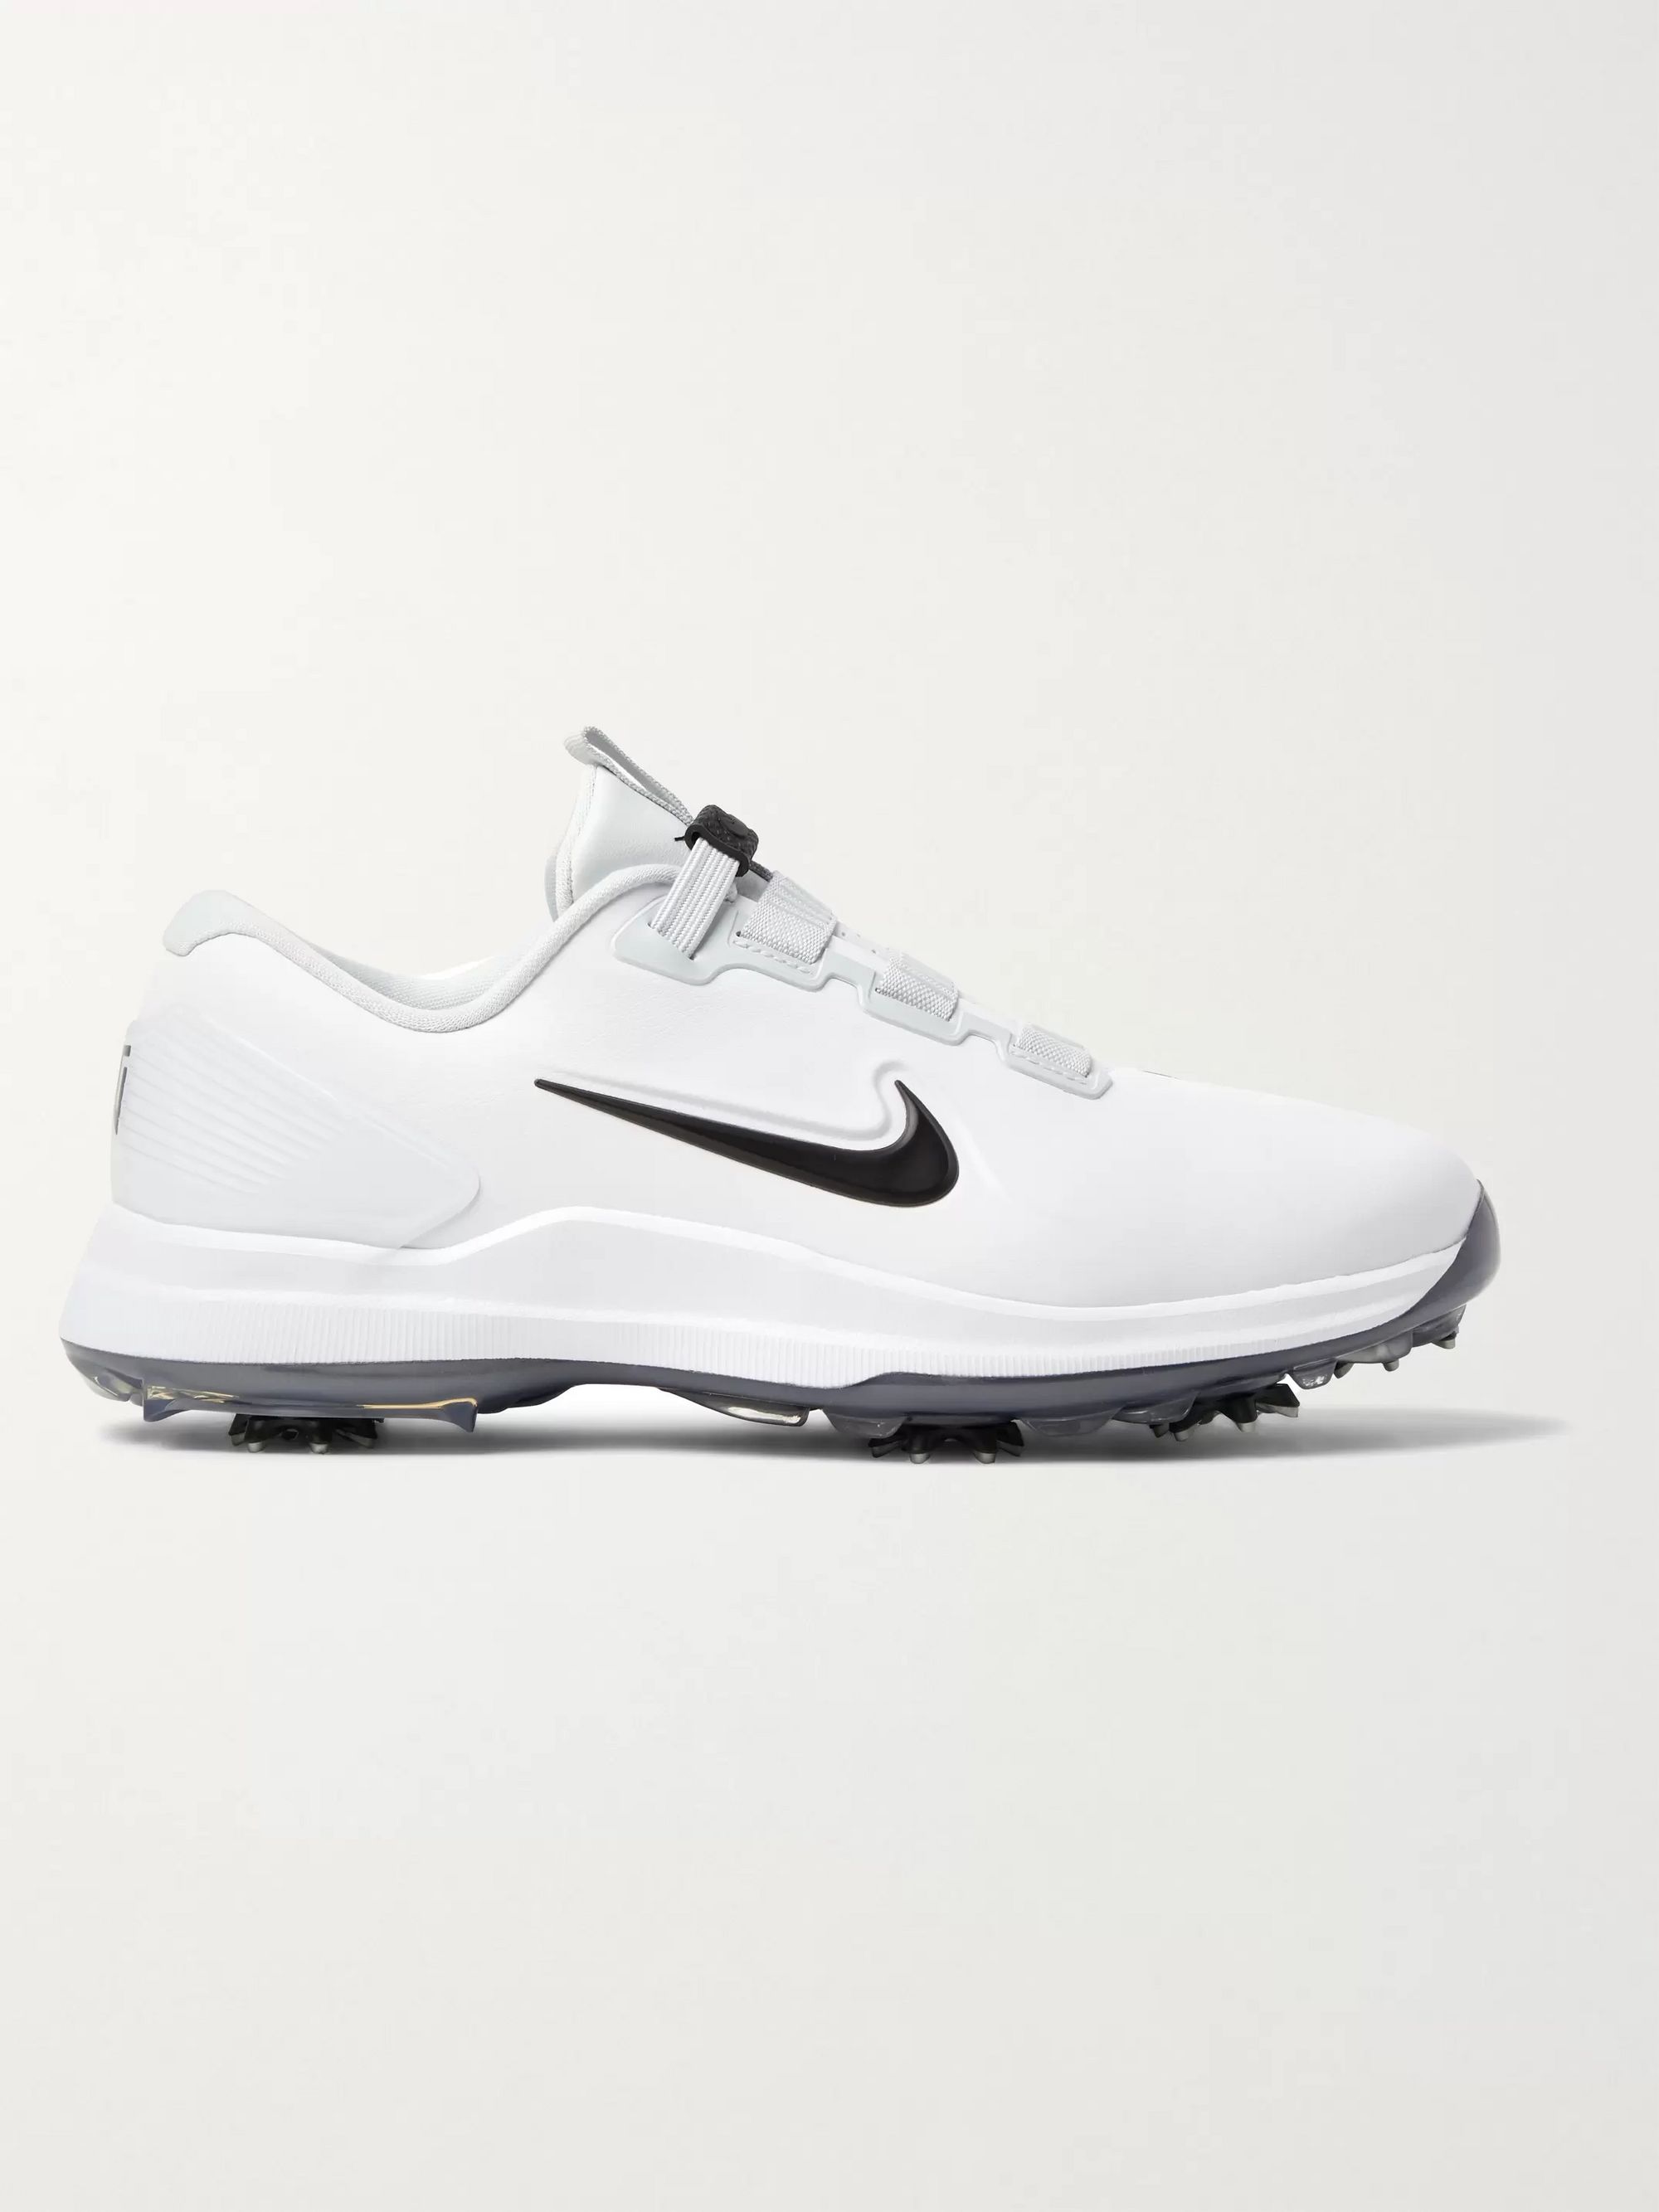 2019 tiger woods shoes